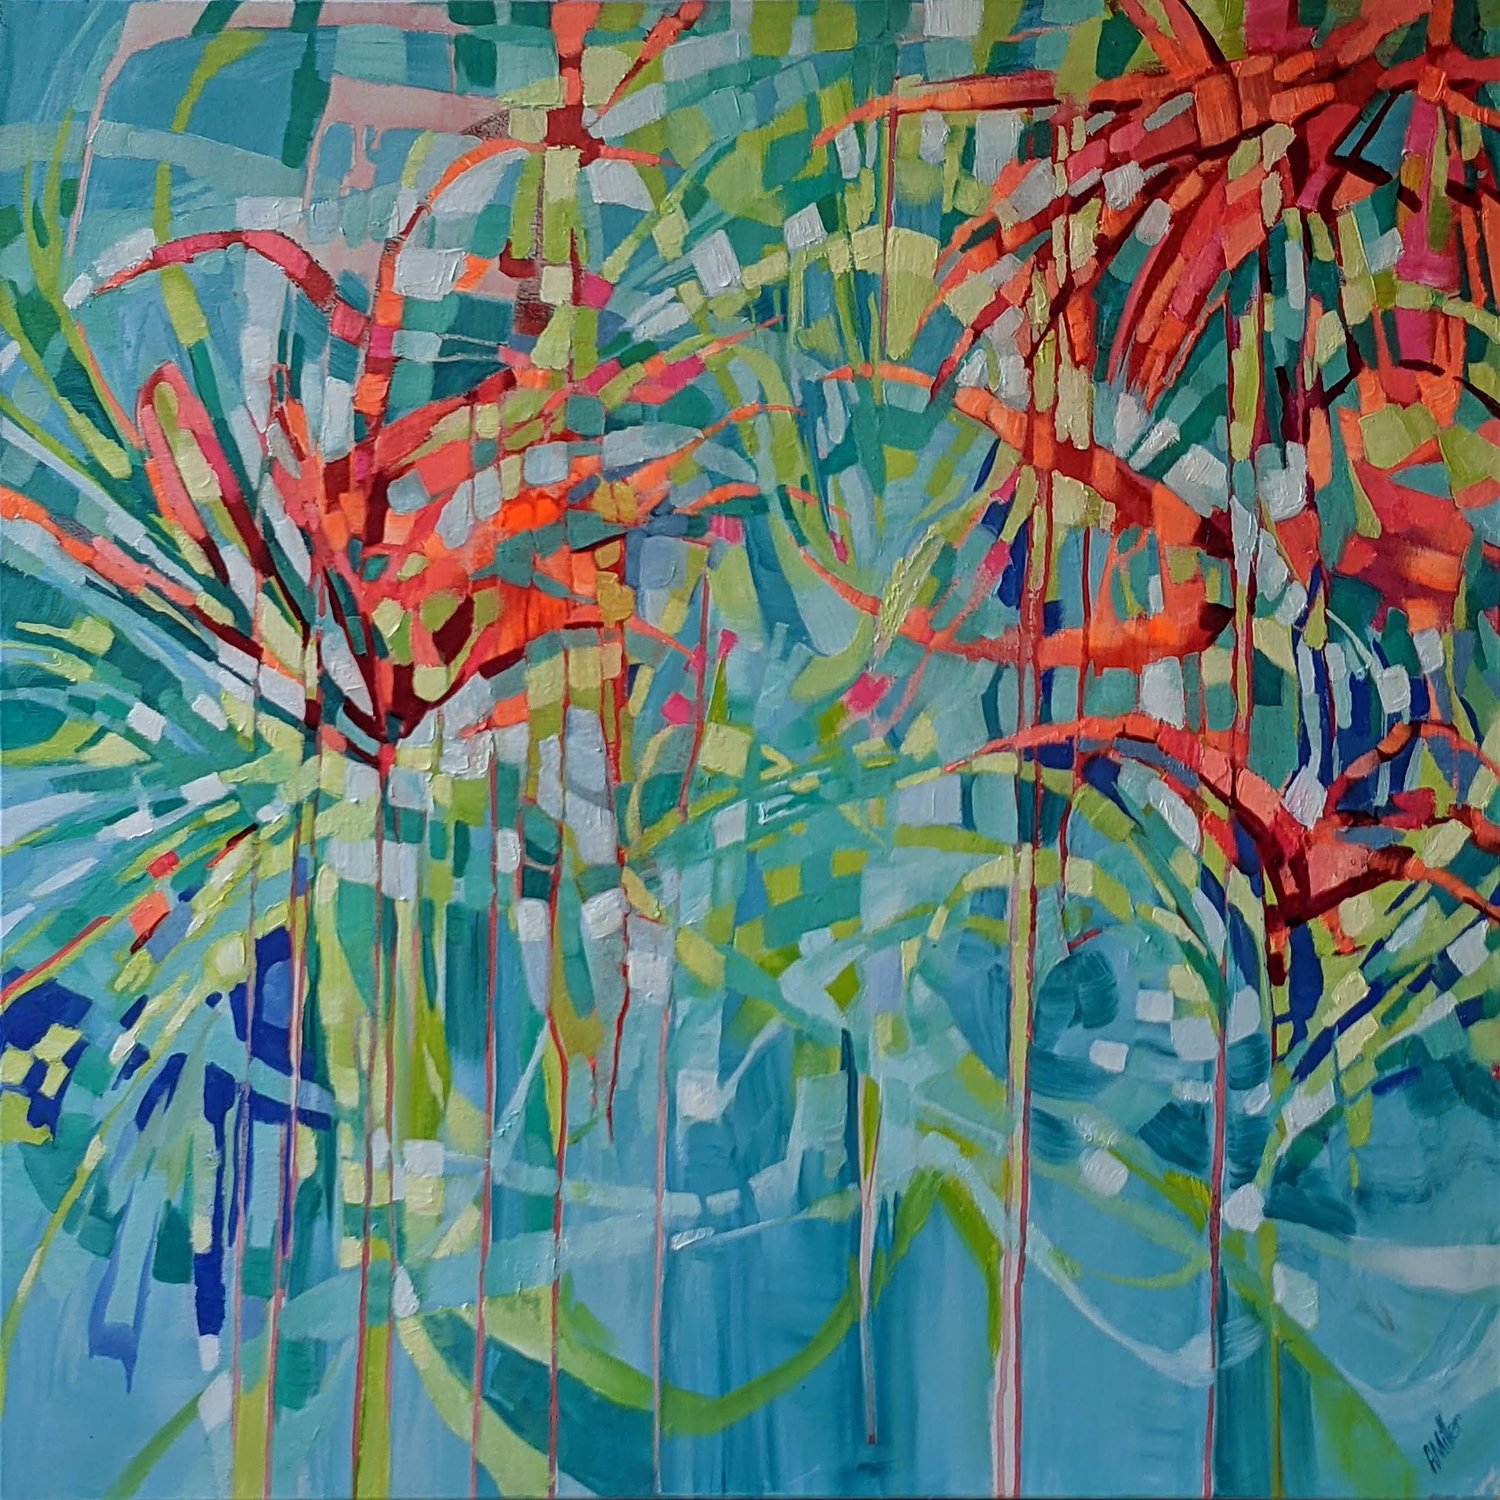 “Tropical” by Anna Miller is oil on canvas